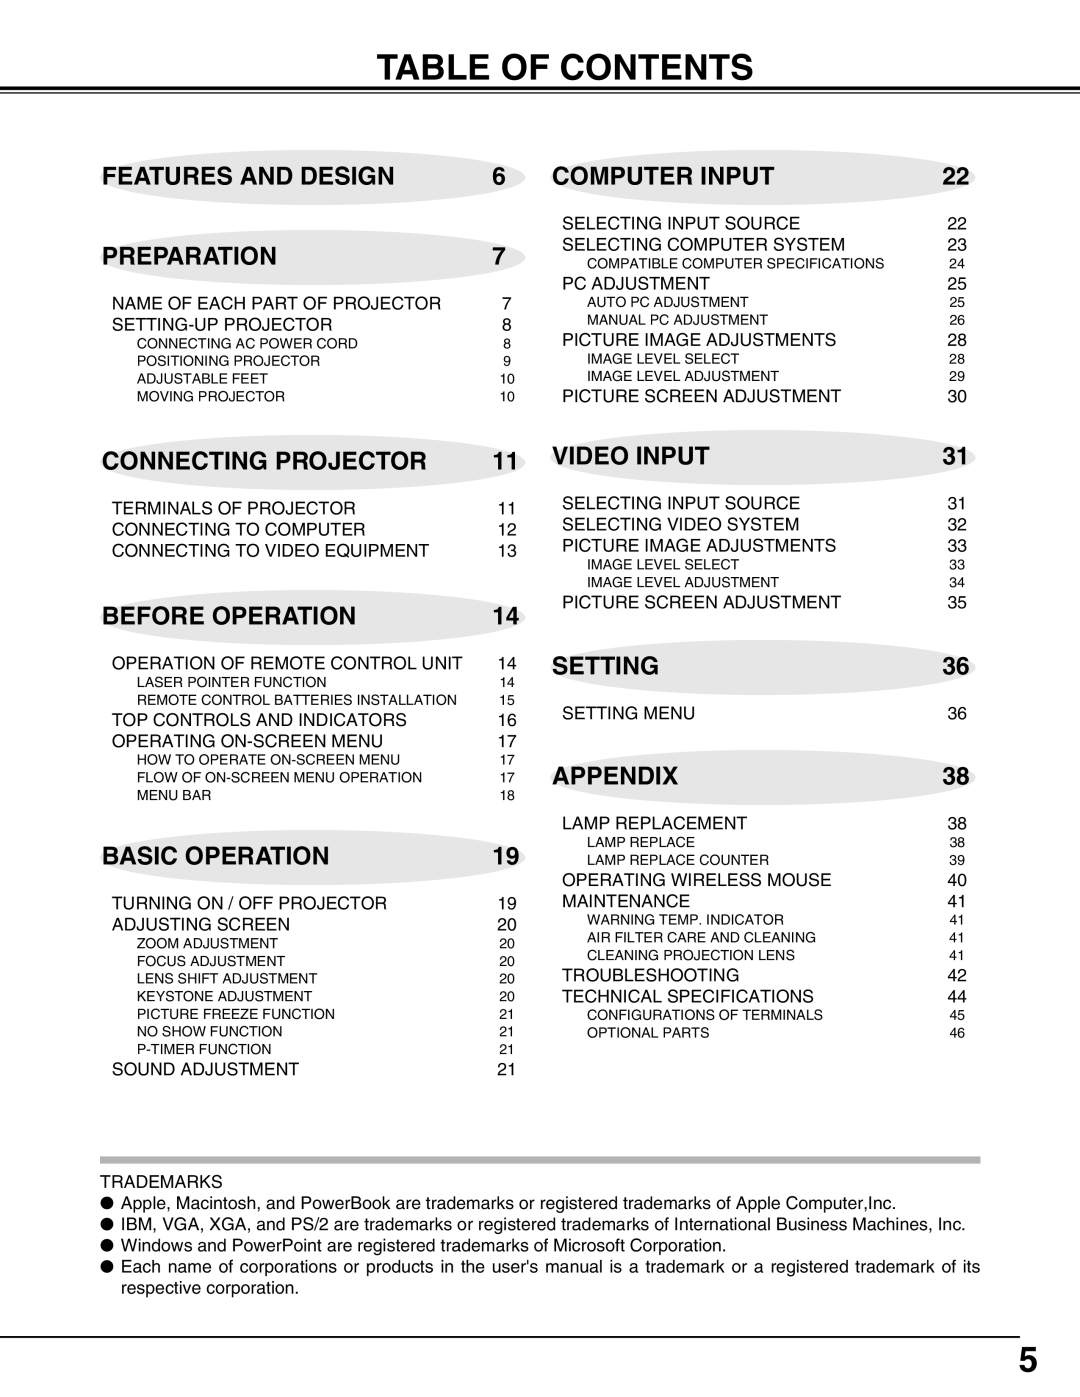 Christie Digital Systems 38-VIV207-01 Table Of Contents, Features And Design, Computer Input, Preparation, Video Input 